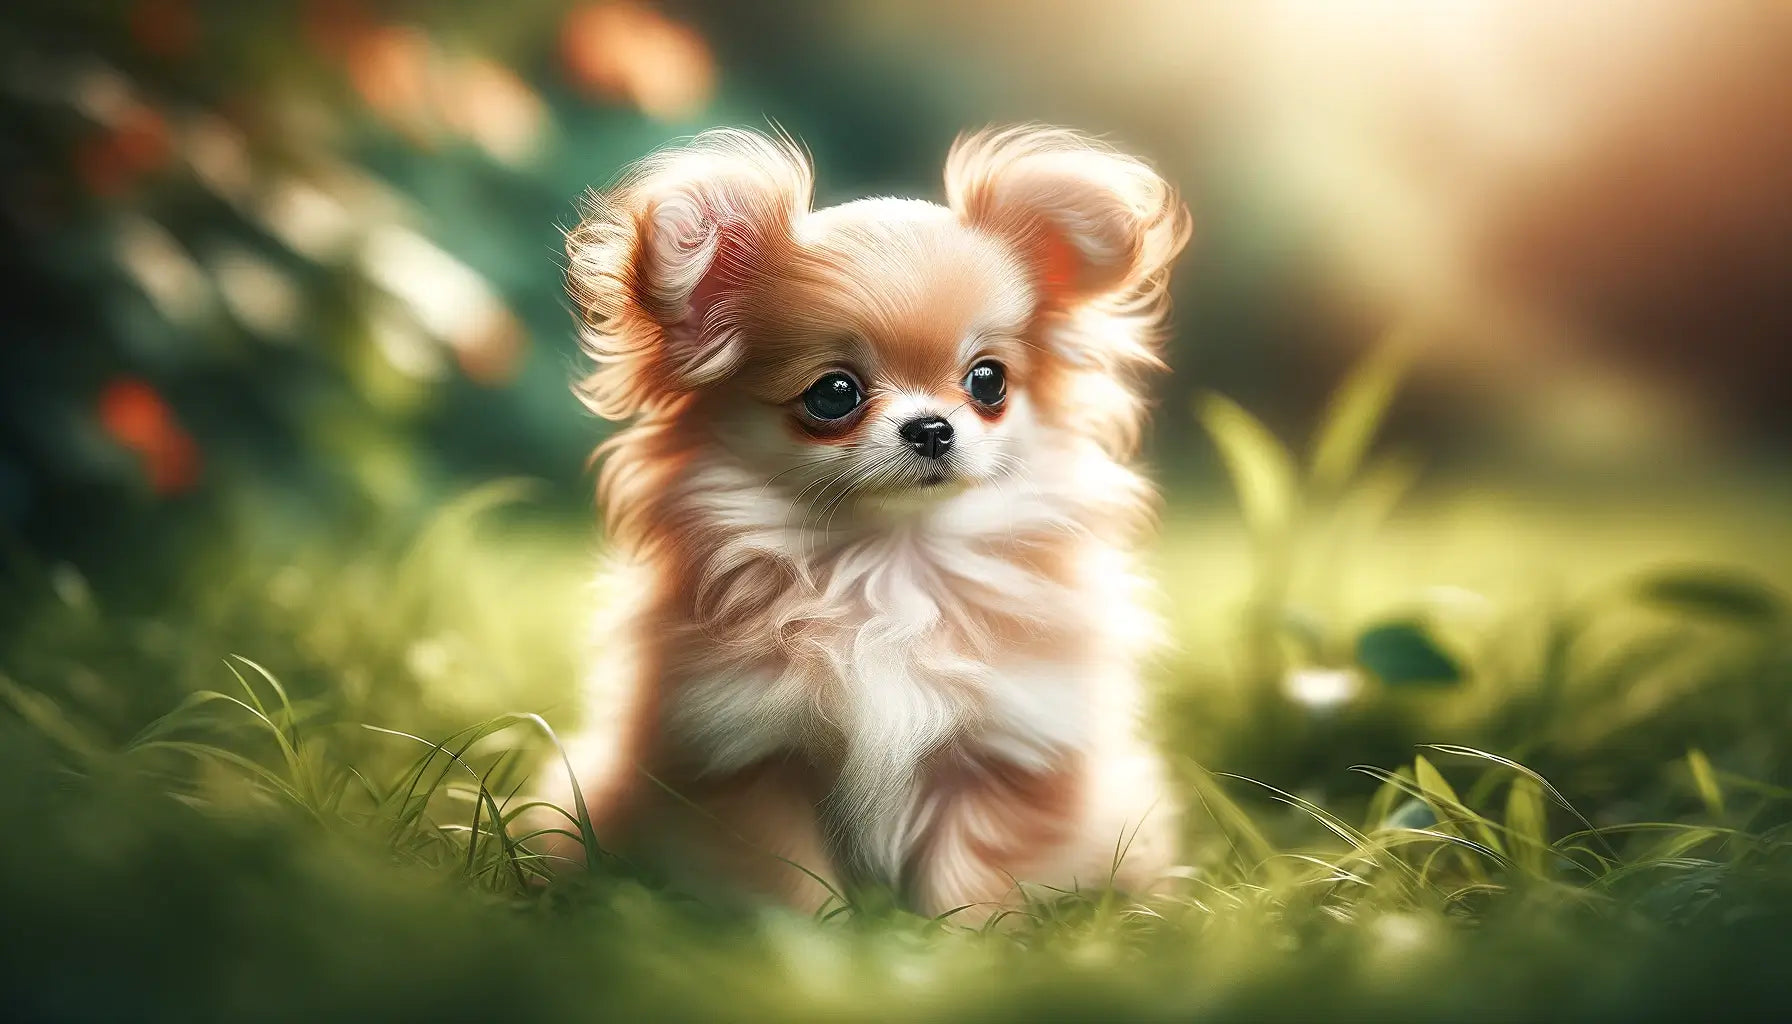 Long-Haired Chihuahua puppy sitting amidst the grass, its diminutive size accentuated by the surrounding greenery.